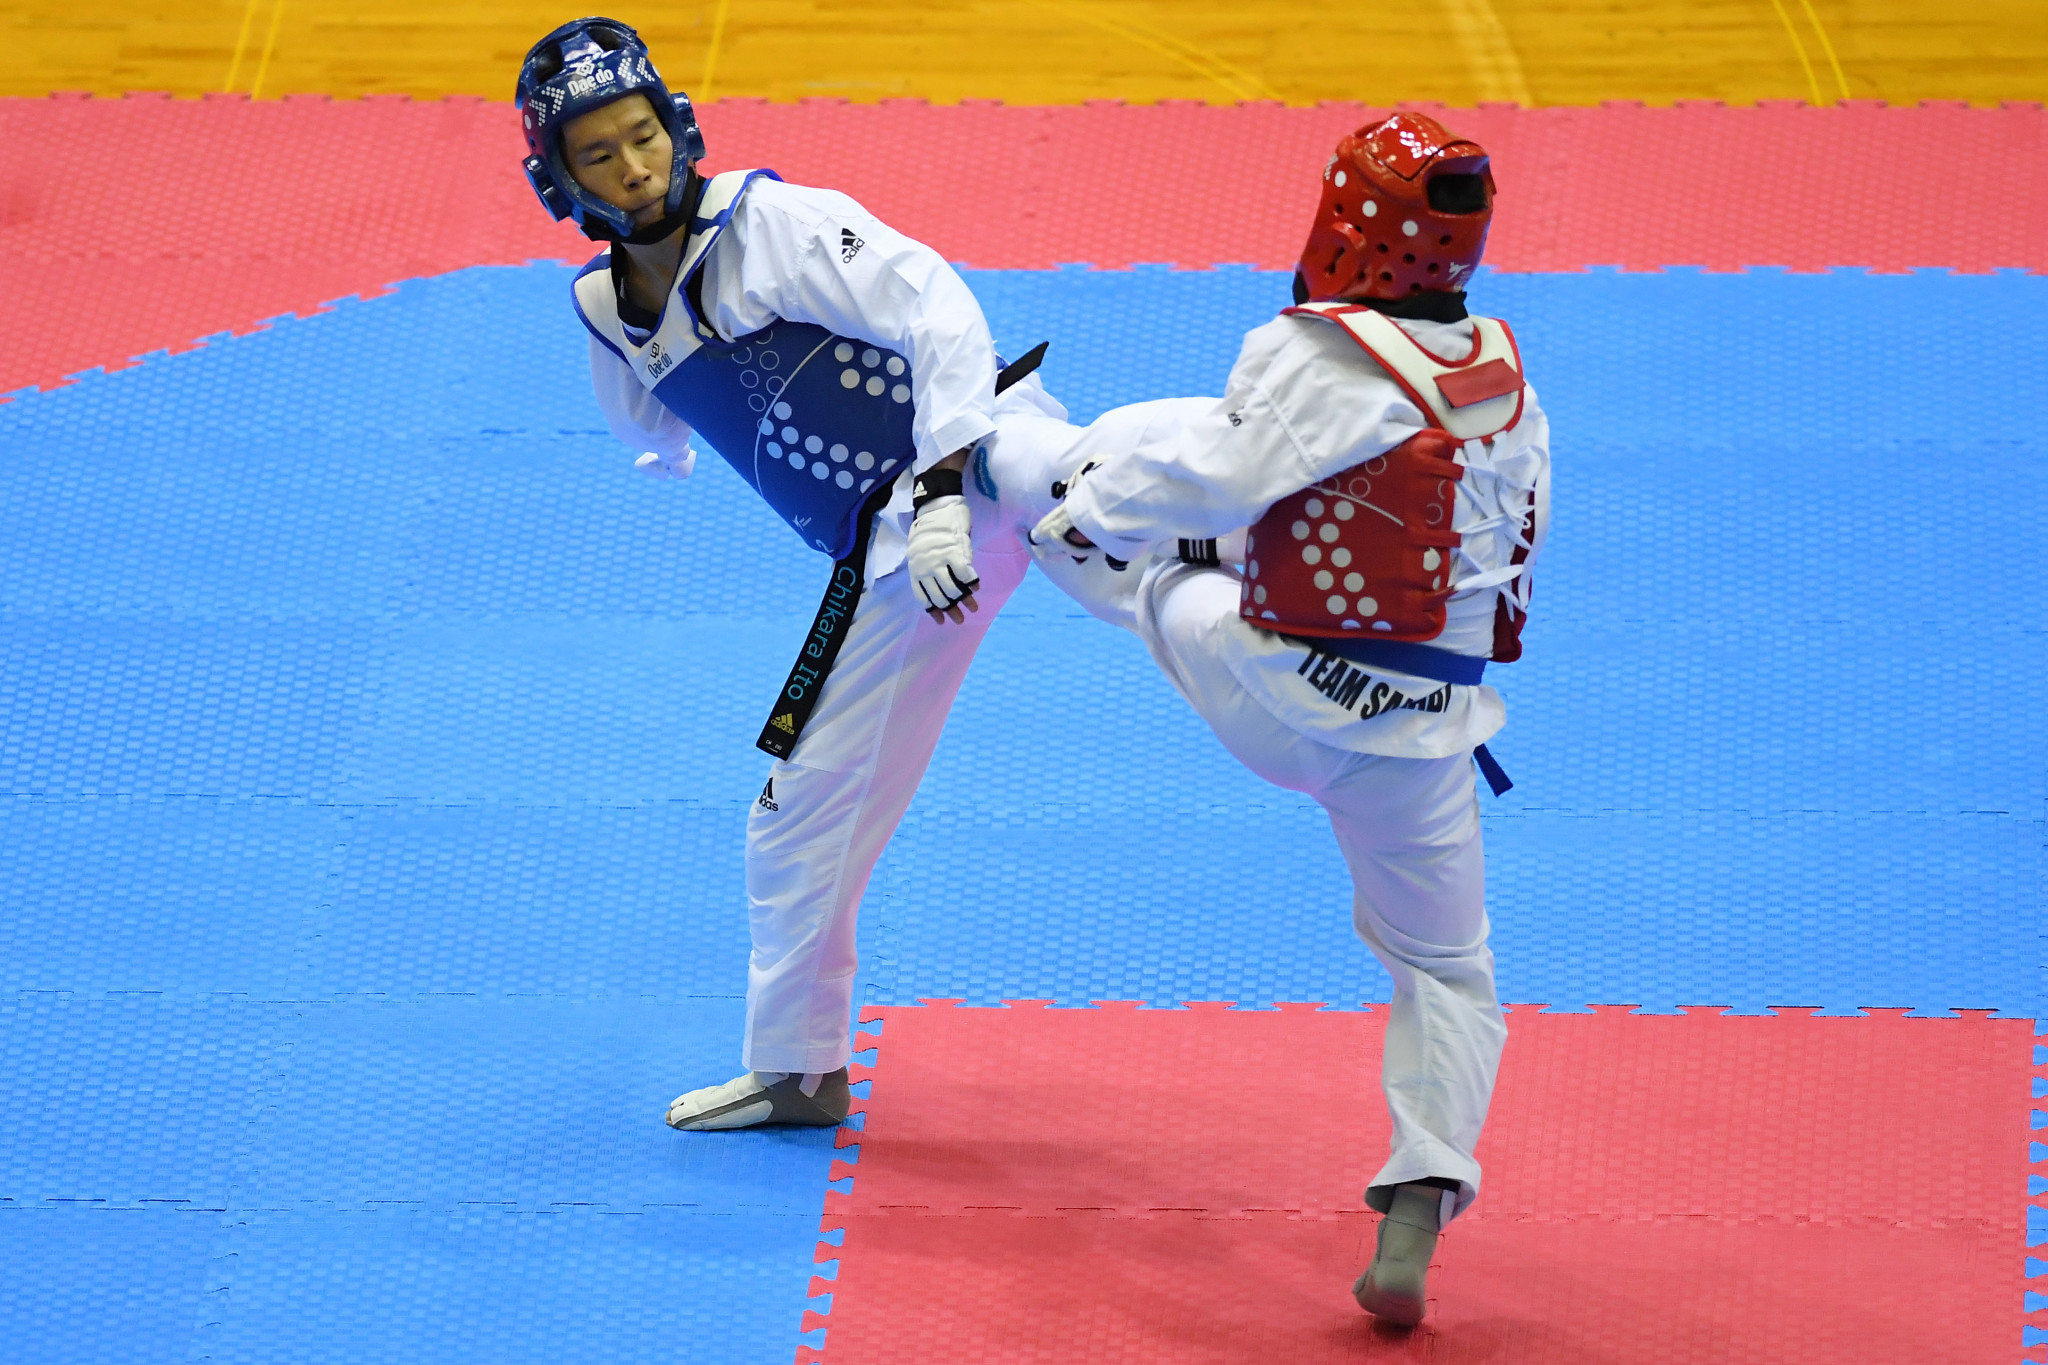 Seven Turkish athletes progressed to the finals at the World Para Taekwondo Championships ©Getty Images